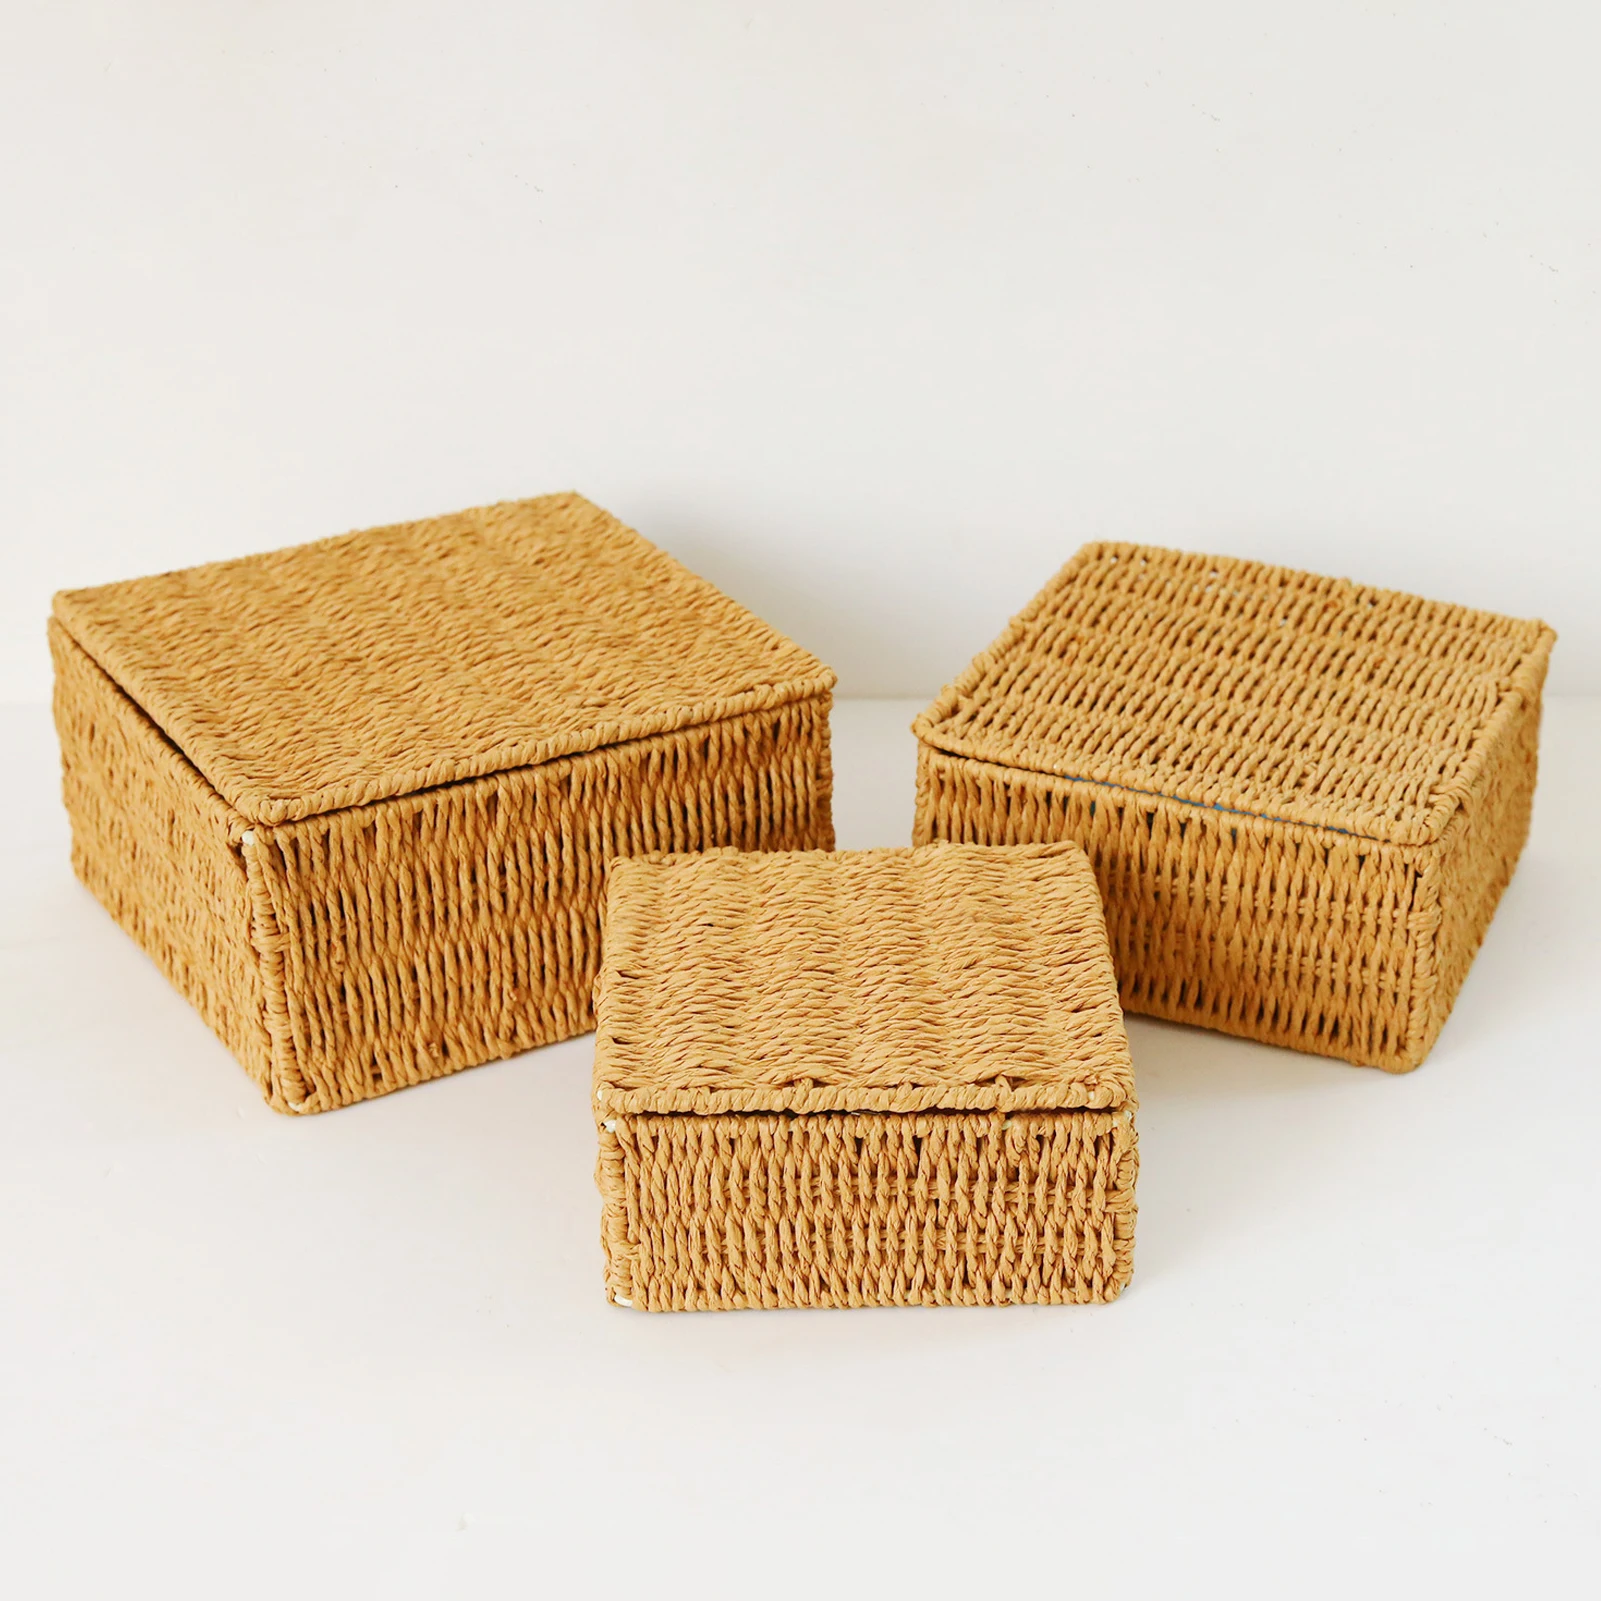 

Woven Wicker Storage Basket Artificial Rattan with Lid Portable Storage Box with Handle Laundry Basket Sundries Clothe Organizer